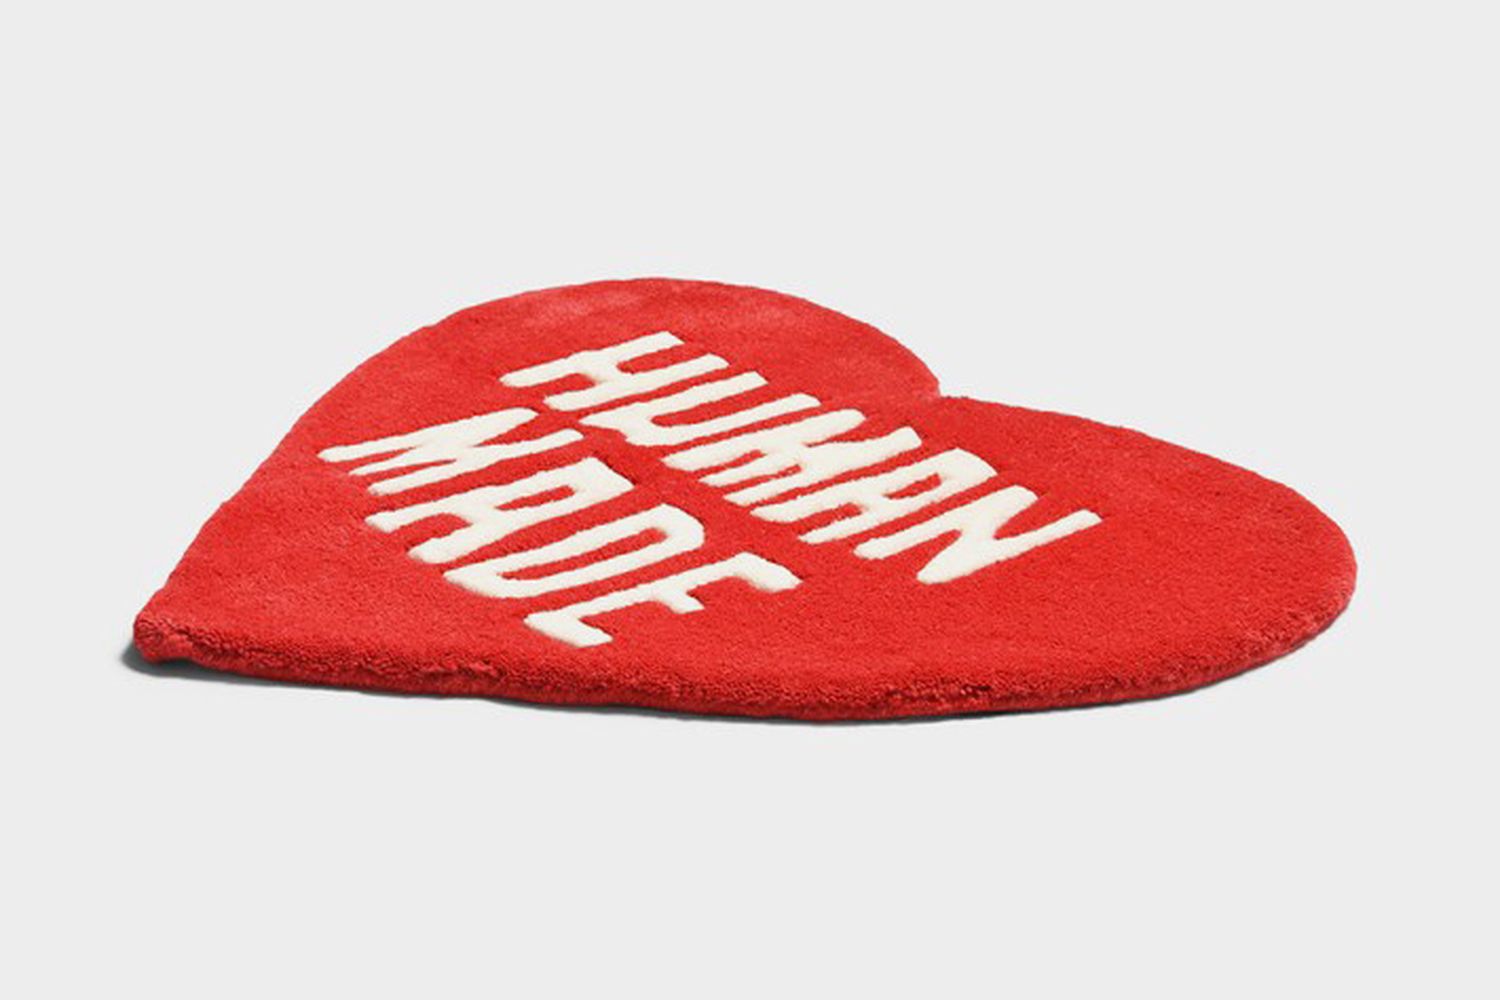 Human Made Love Heart Rug: Where to Buy, Price & More Info